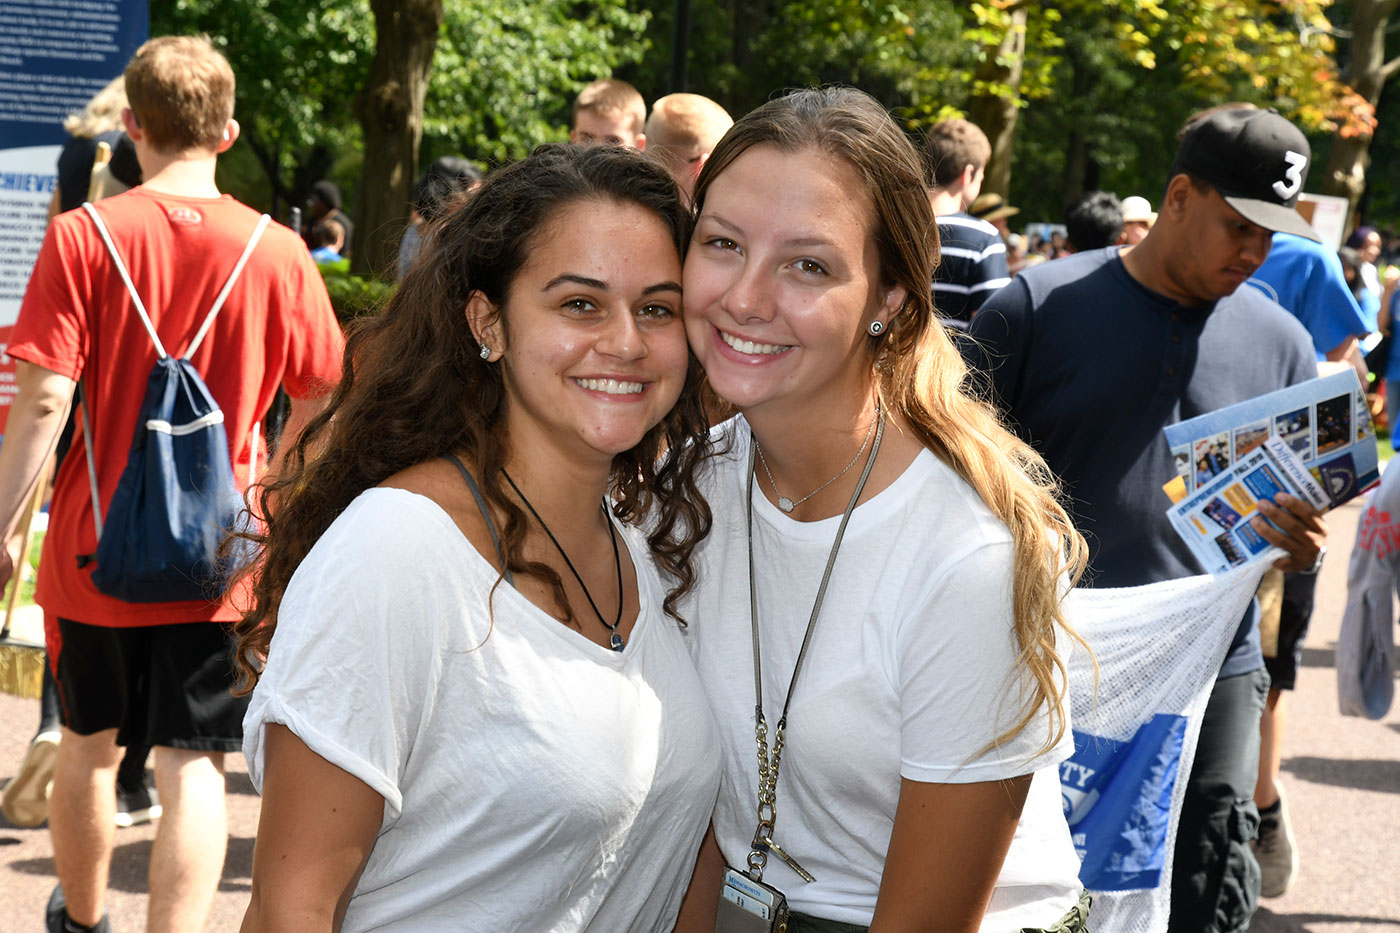 Two female students outside at engagement fair (close up) smiling